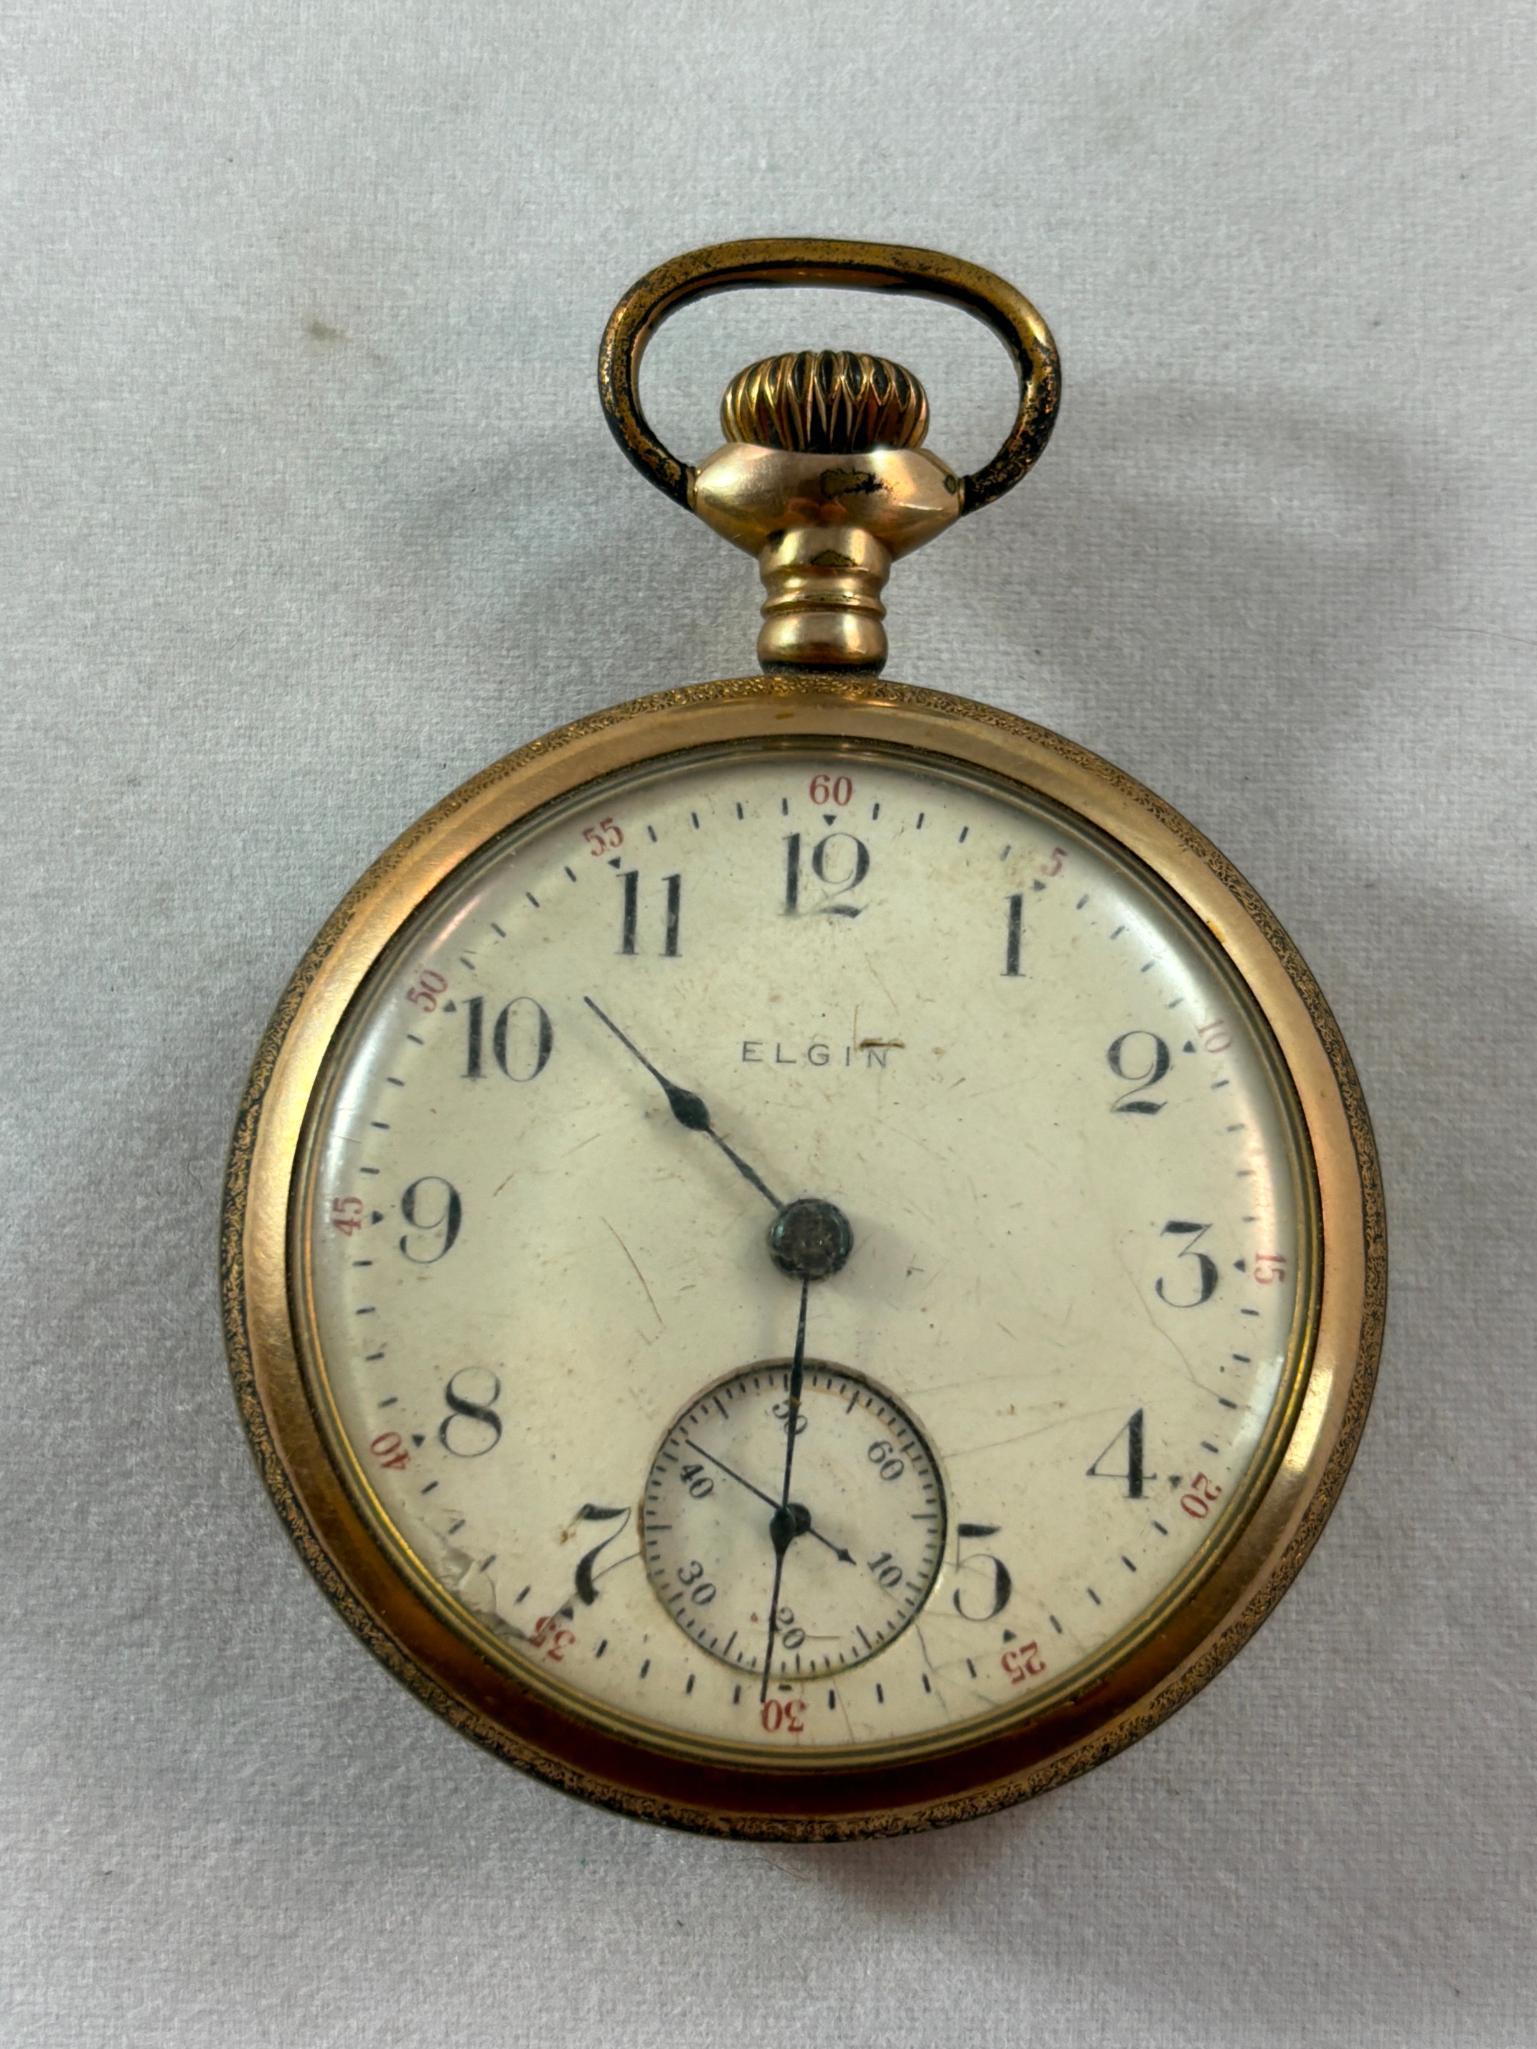 Two Gold Filled Pocket Watches 18 size Dueber Grand 18 Size Elgin